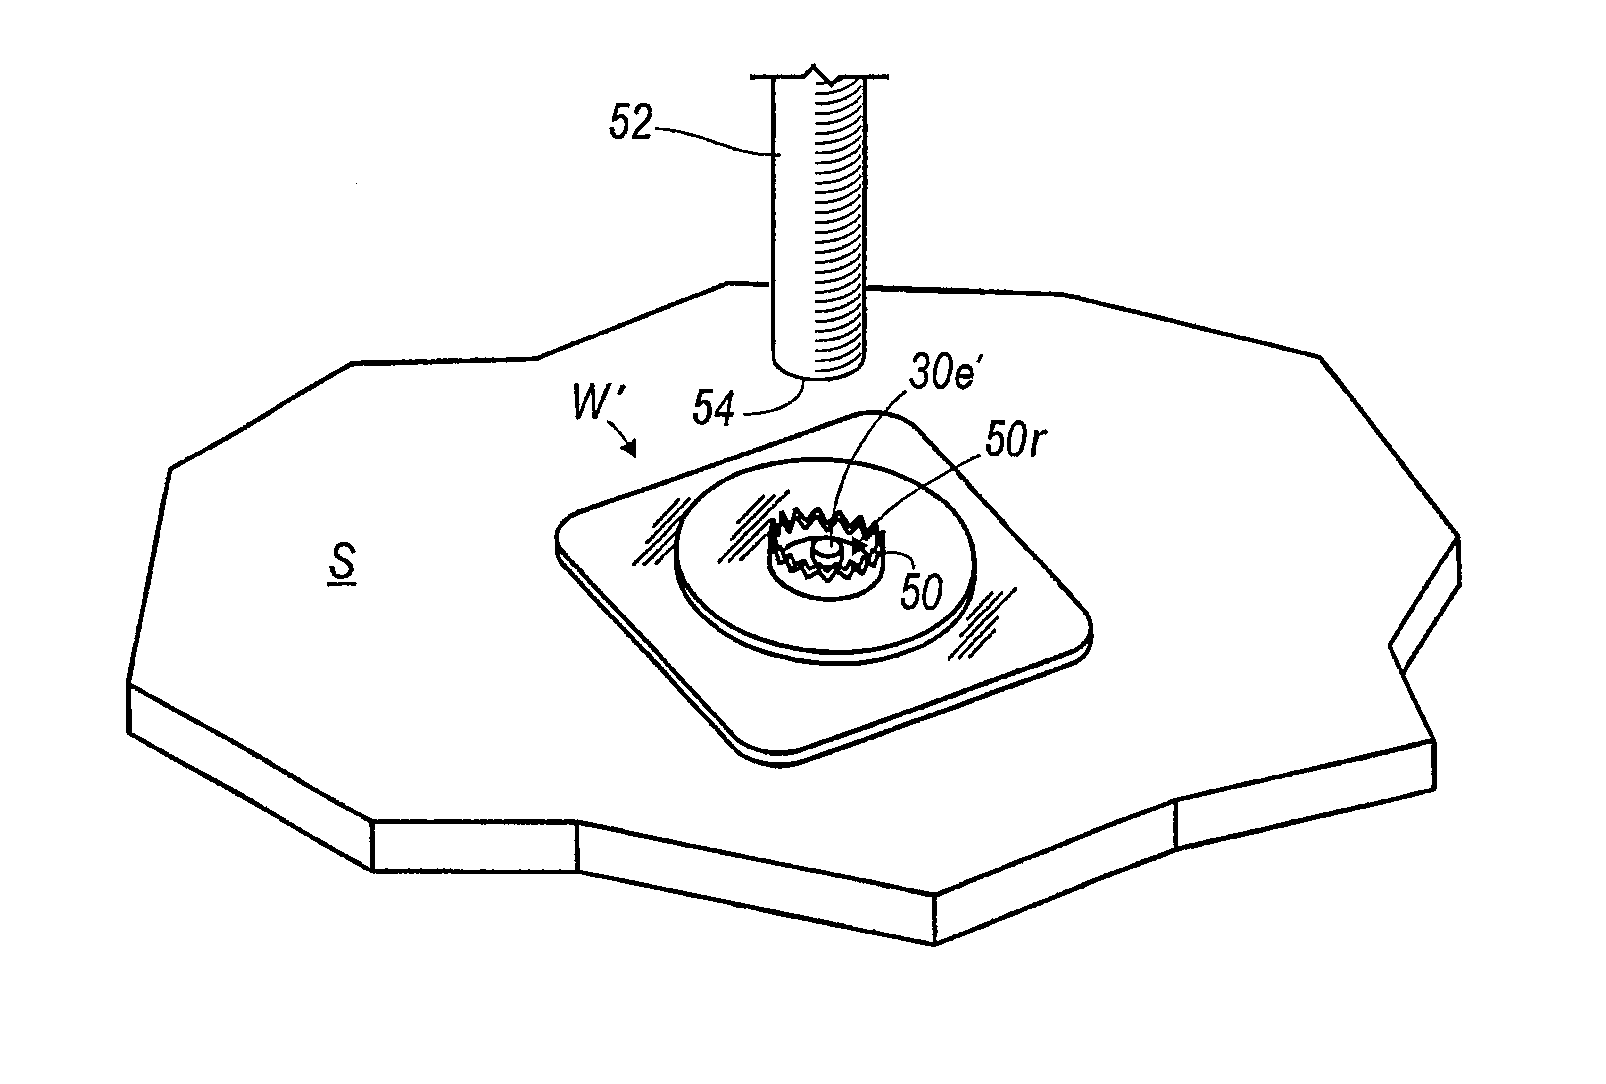 Method of Connecting Jewelry Components